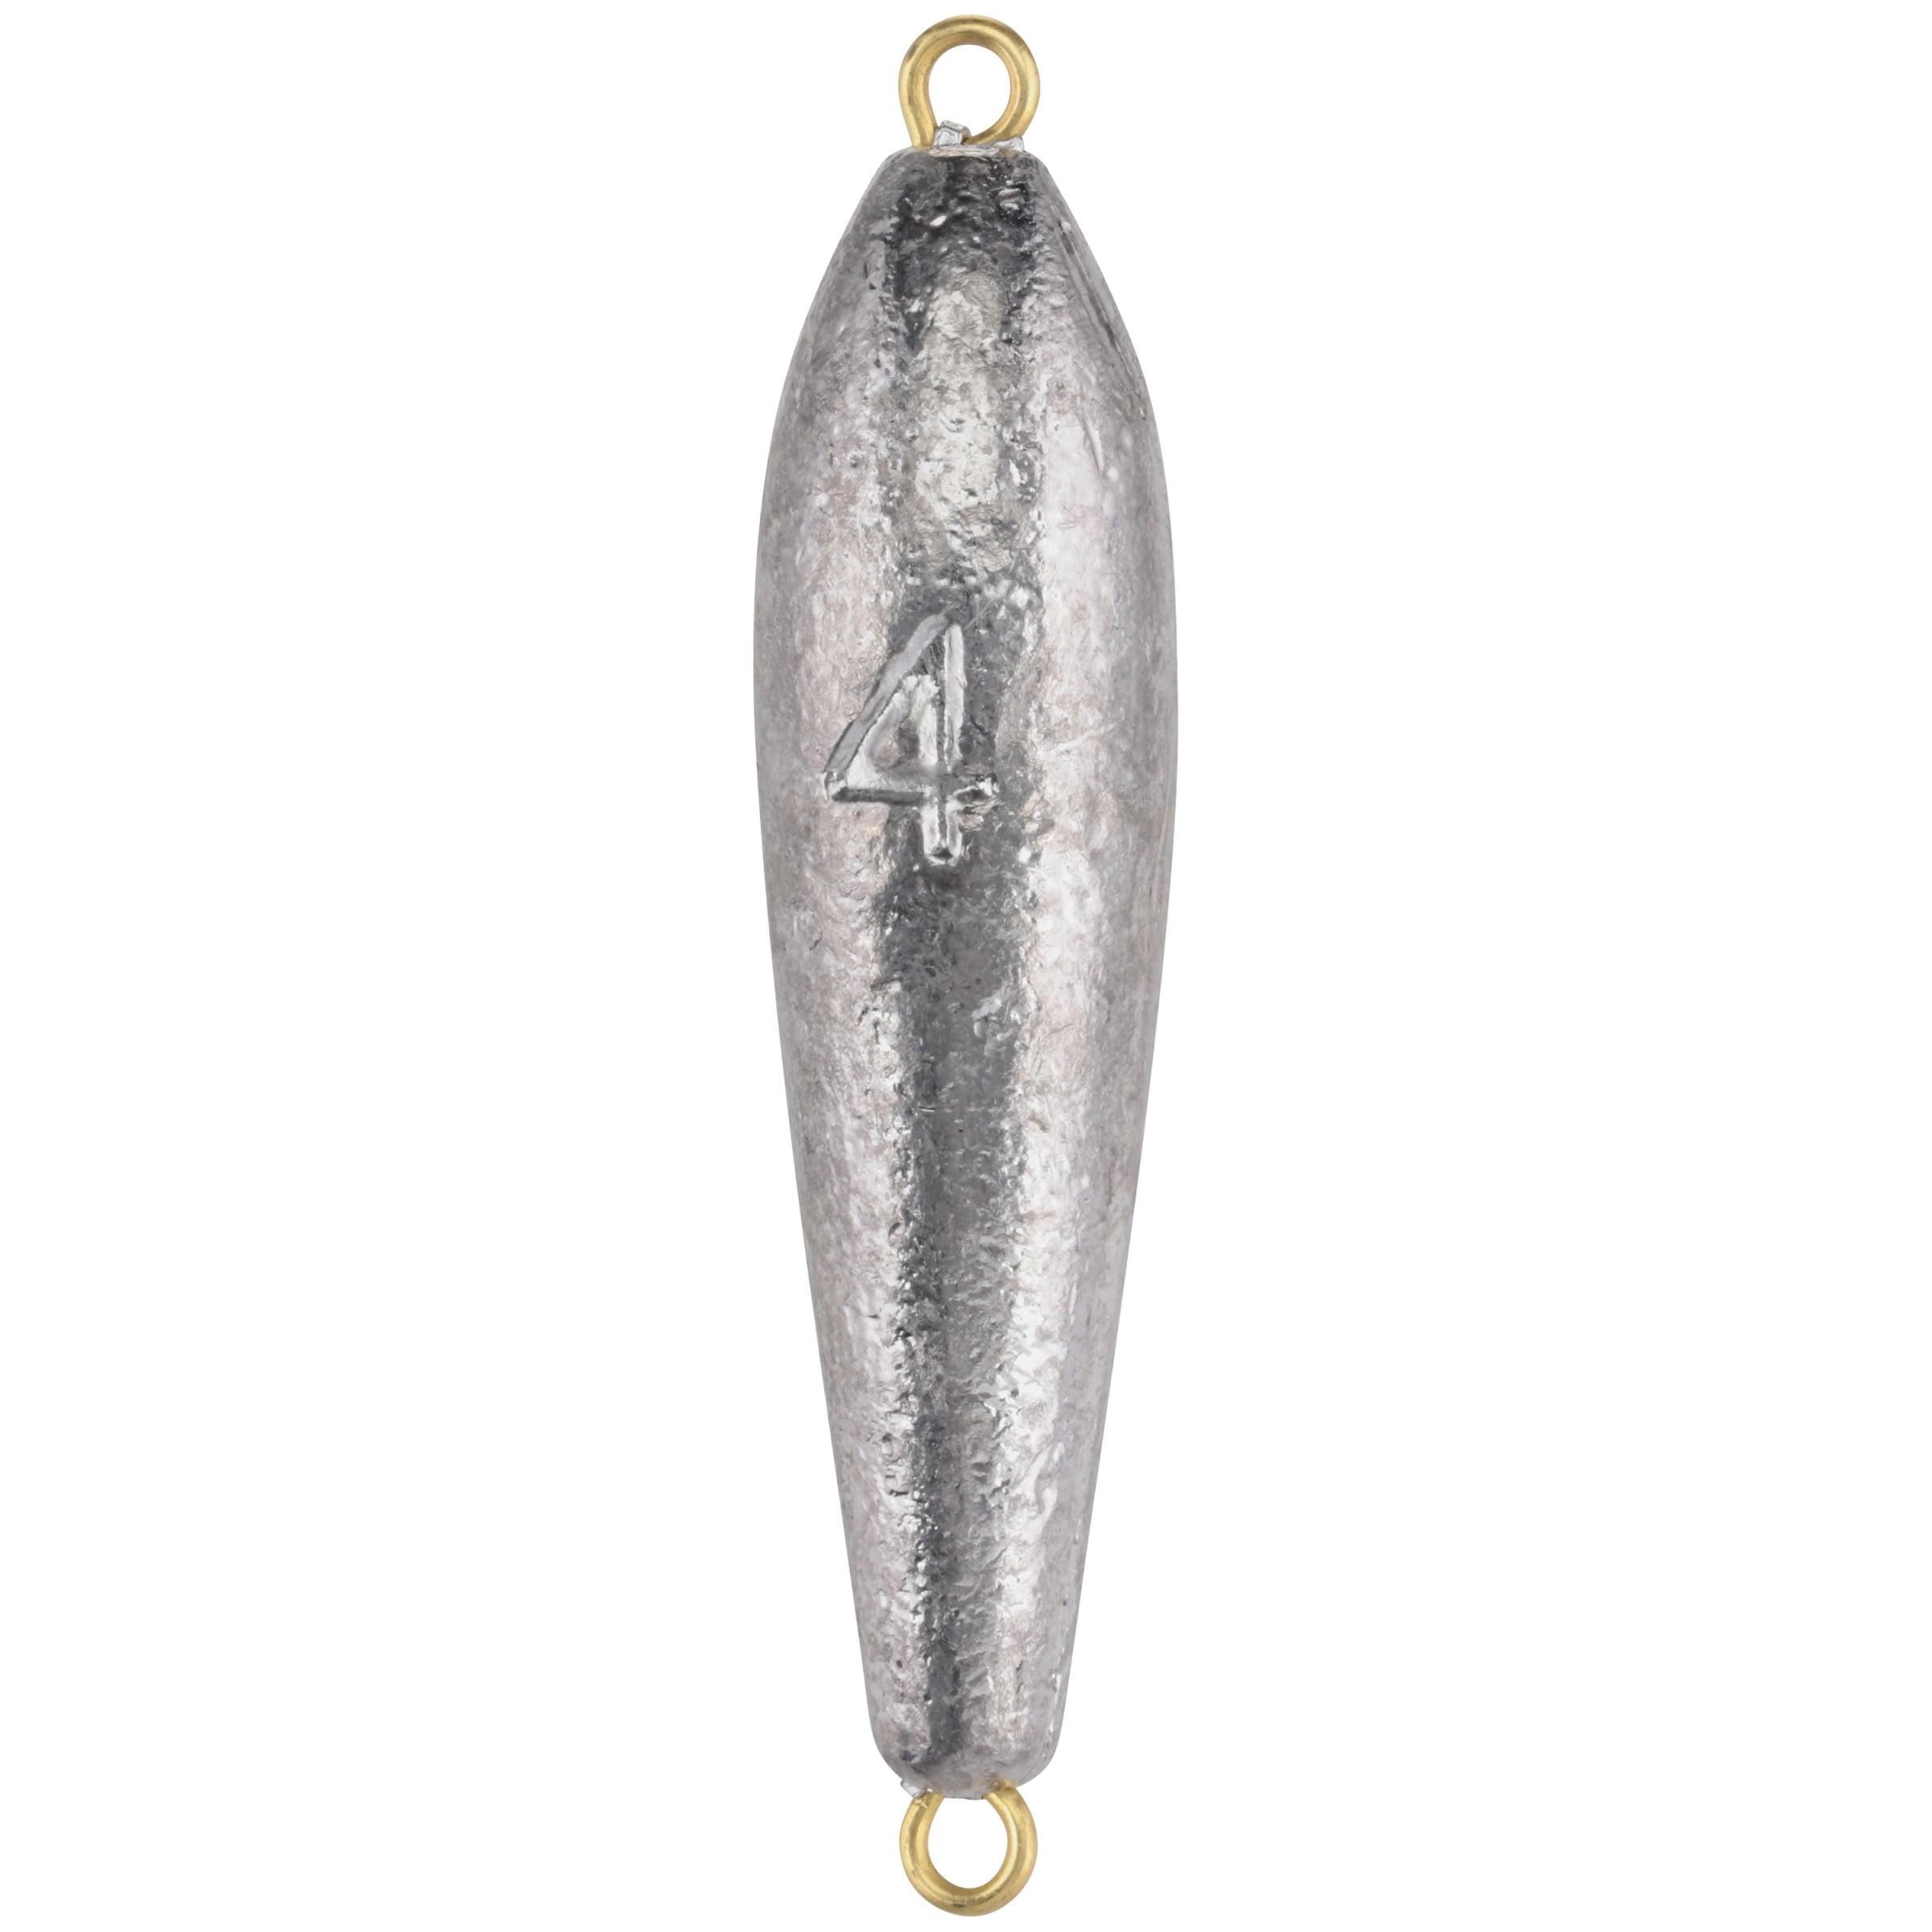 Deep Sea Fishing 10 1lb Pound Lead Rock Cod Weight Sinkers with brass eyes 